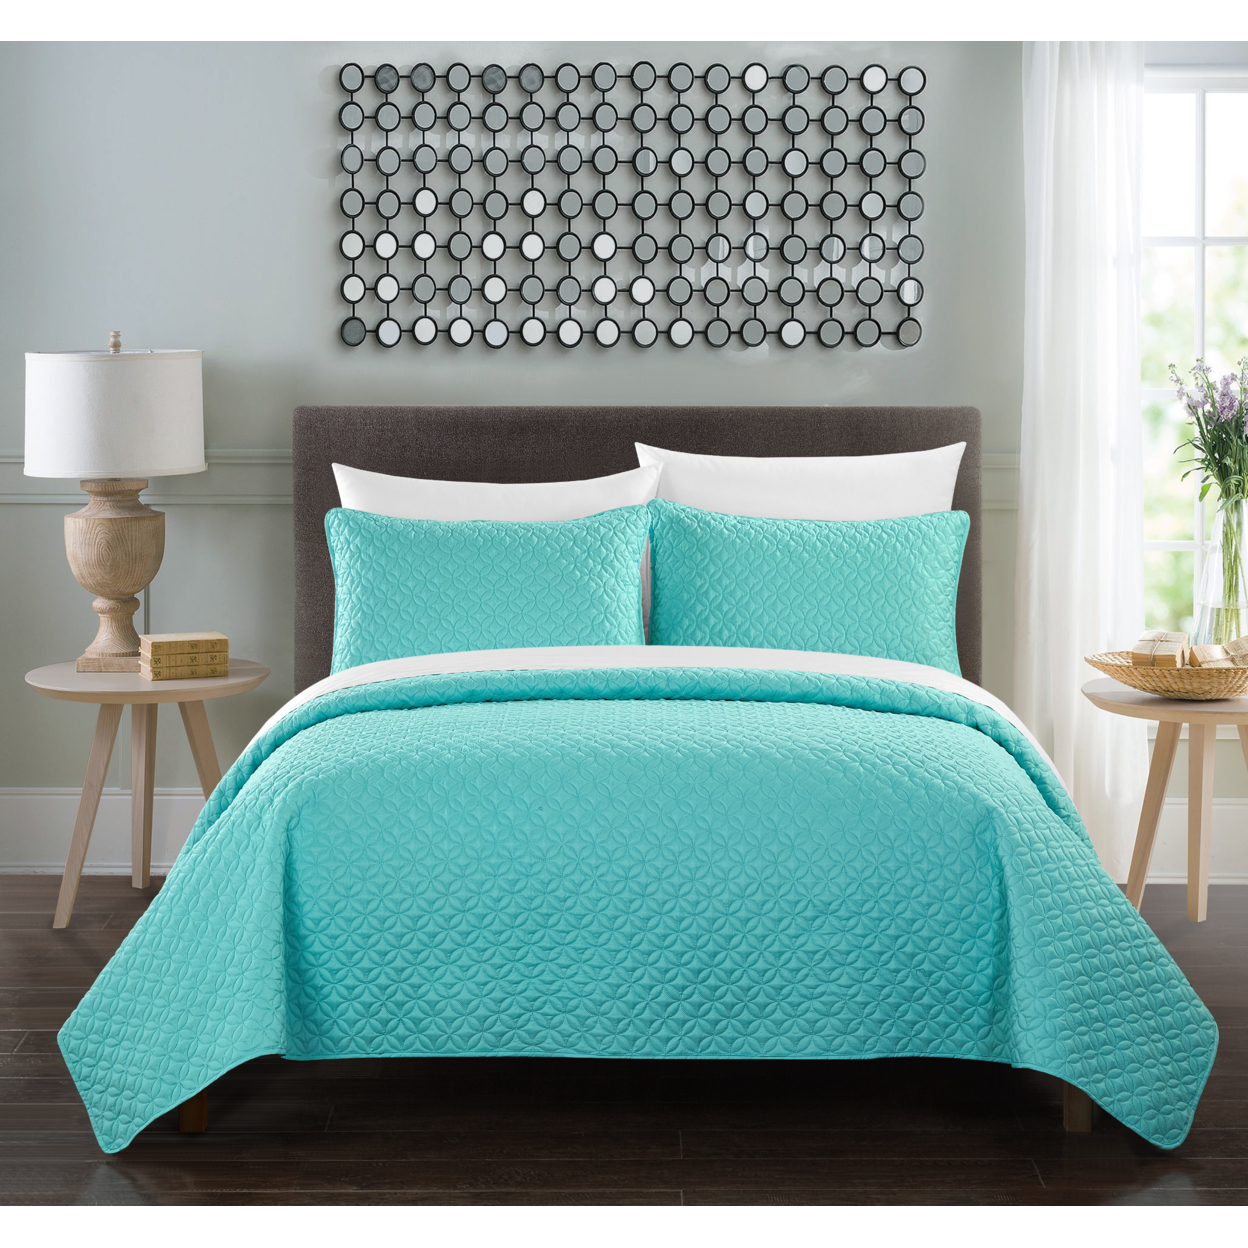 Gideon 3 Or 2 Piece Quilt Cover Set Rose Star Geometric Quilted Bedding - Aqua, Twin